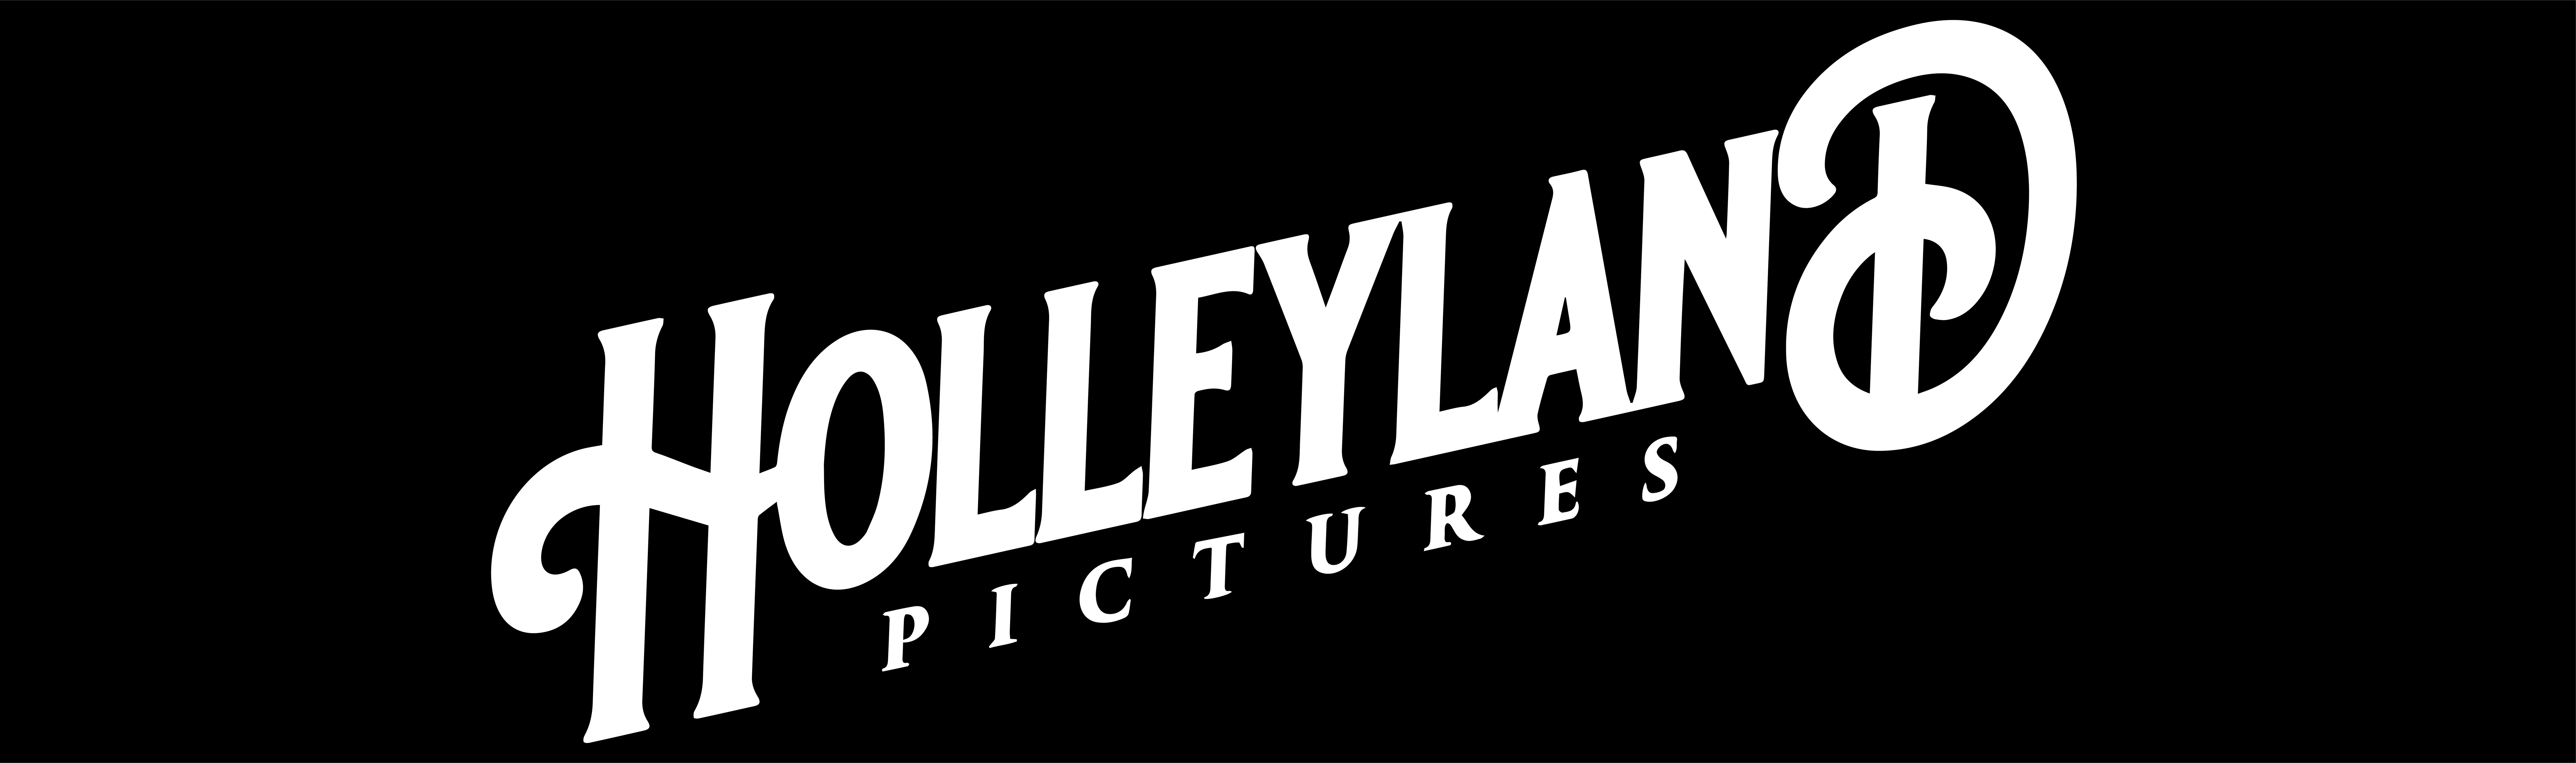 Holleyland Pictures logo